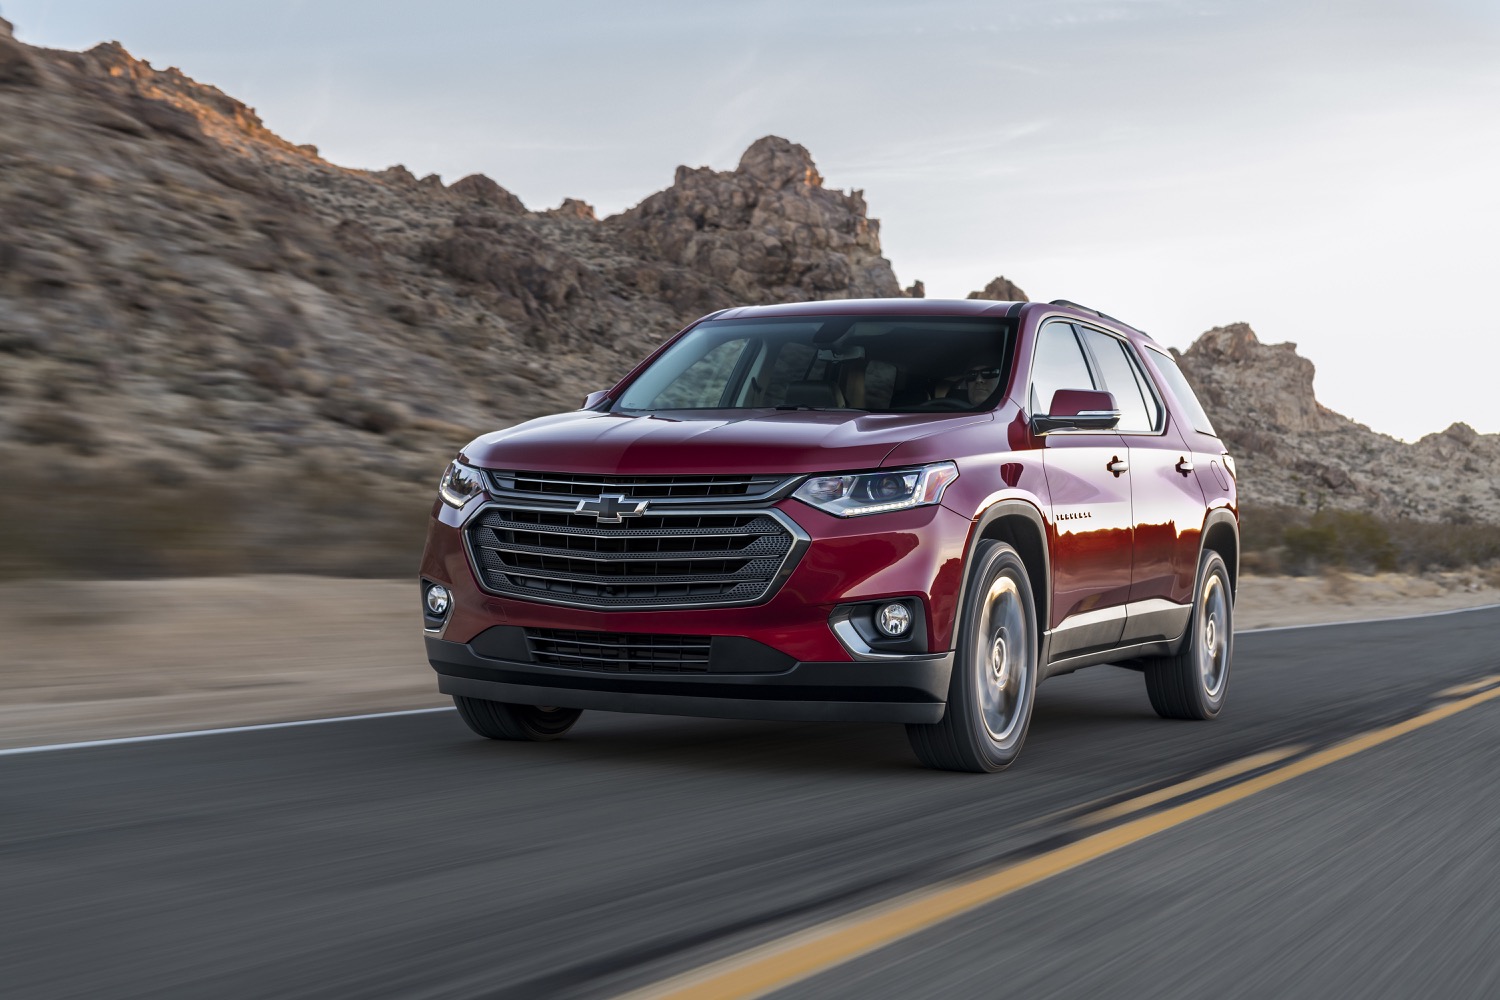 2018 Chevrolet Traverse RS exterior 001 front